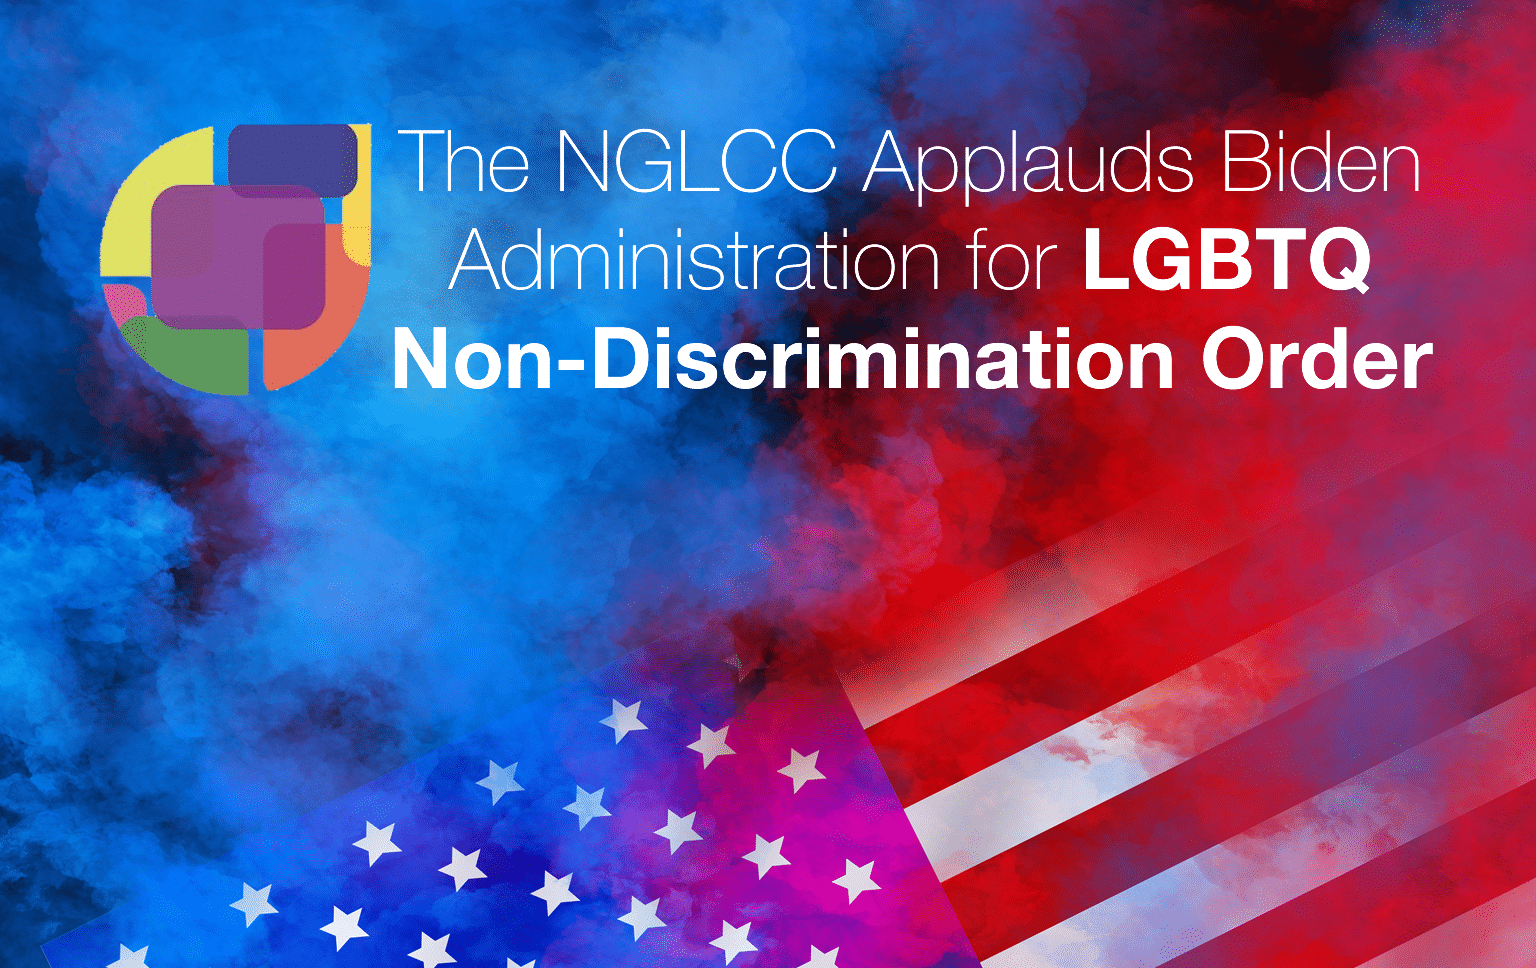 You are currently viewing NGLCC Applauds Biden Administration LGBTQ Non-Discrimination Order on Day 1